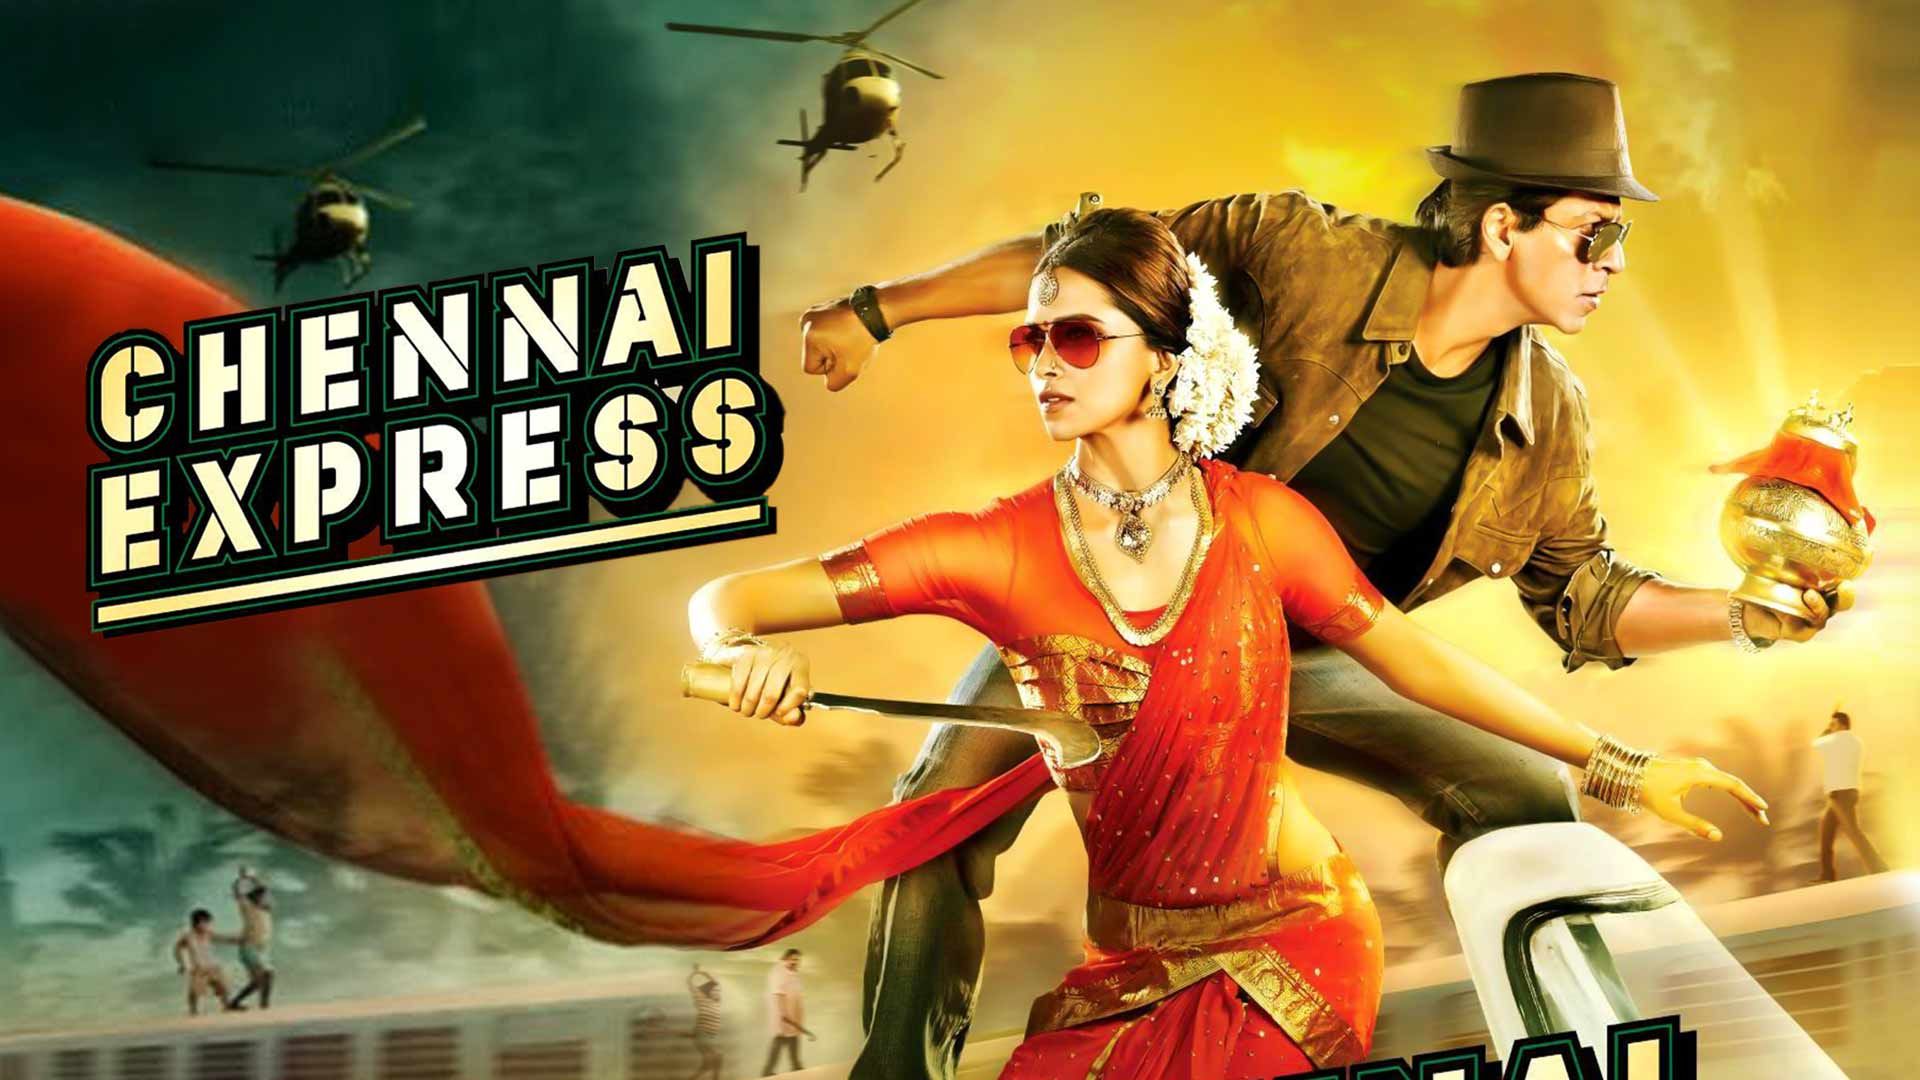 Image result for chennai express